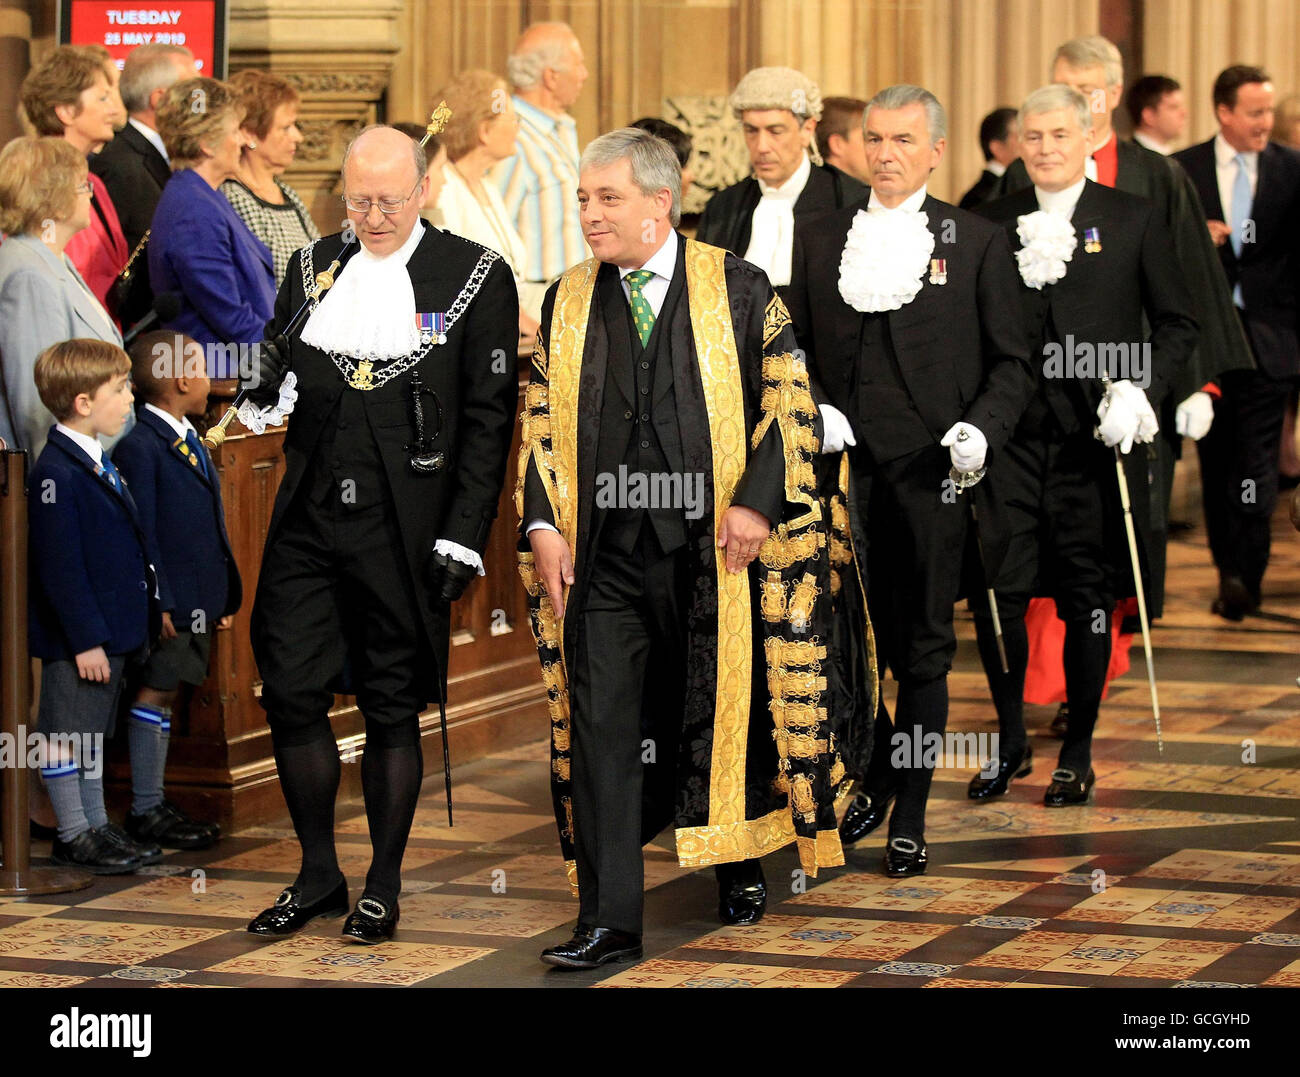 Speaker of the House of Commons, John Bercow MP walks through the Central  Lobby from the House of Lords to the House of Commons during the State  Opening of Parliament in London